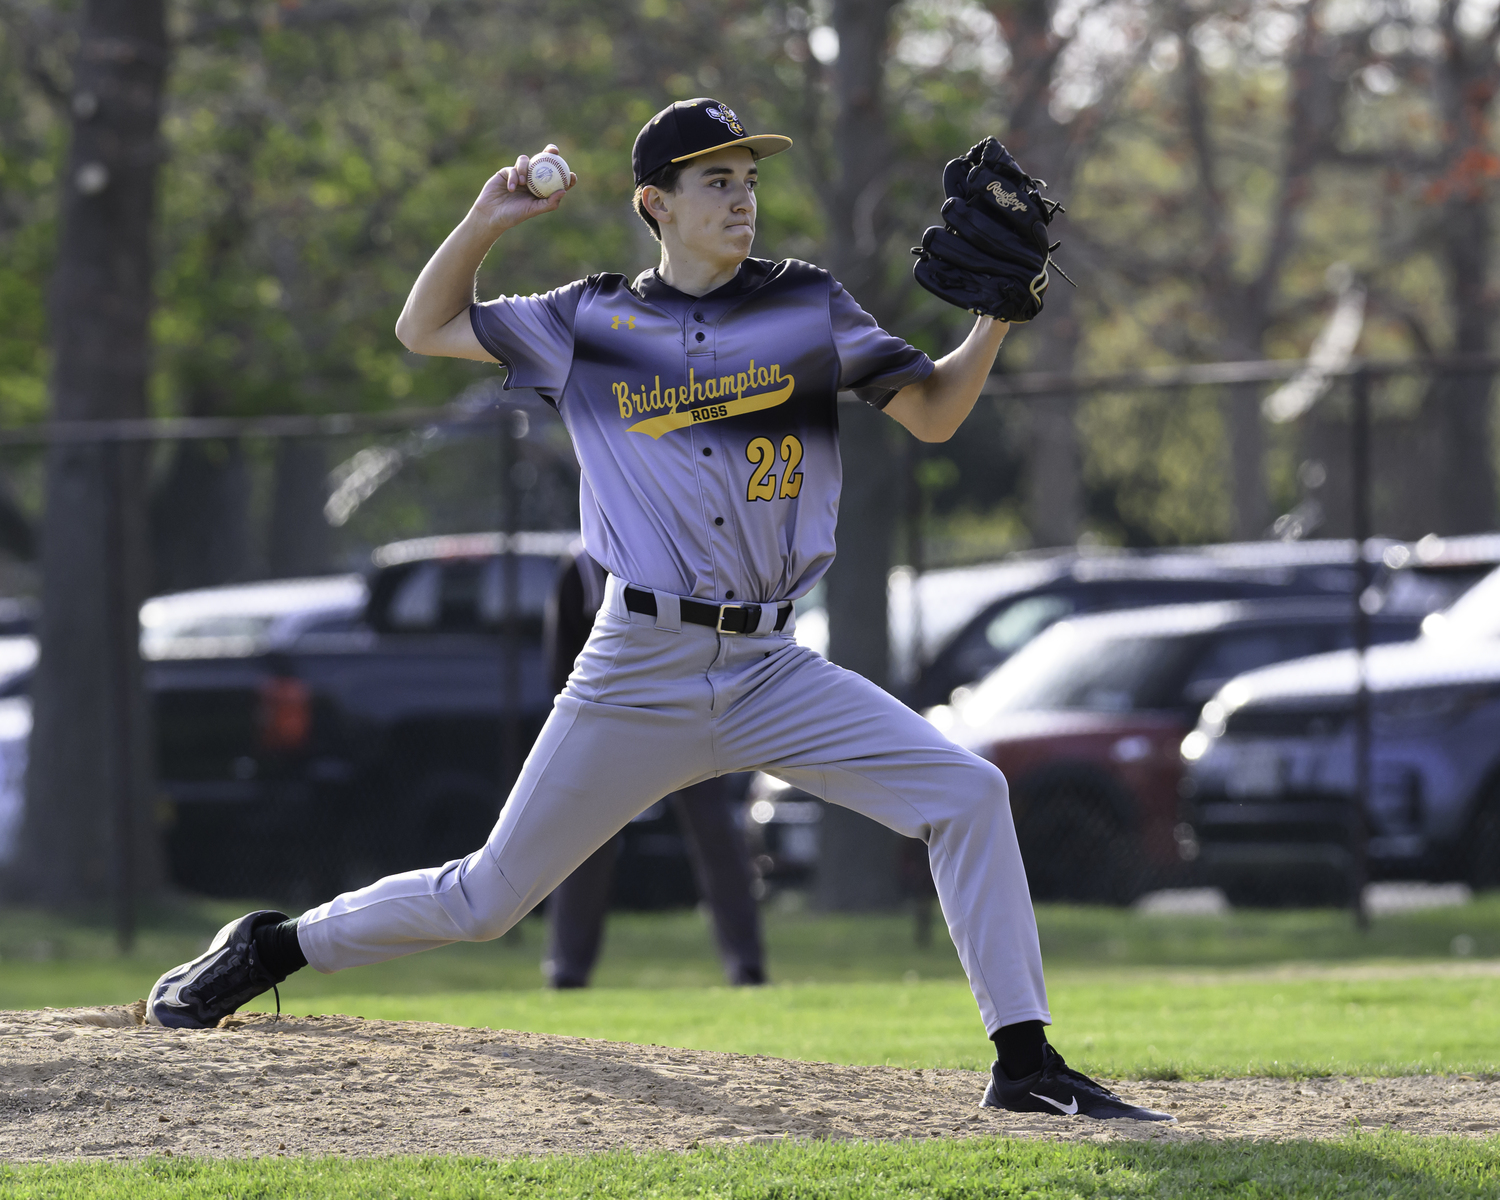 Ross junior Alexi Kardaras also pitched in game two of the series at Mashashimuet Park in Sag Harbor on May 1.   MARIANNE BARNETT